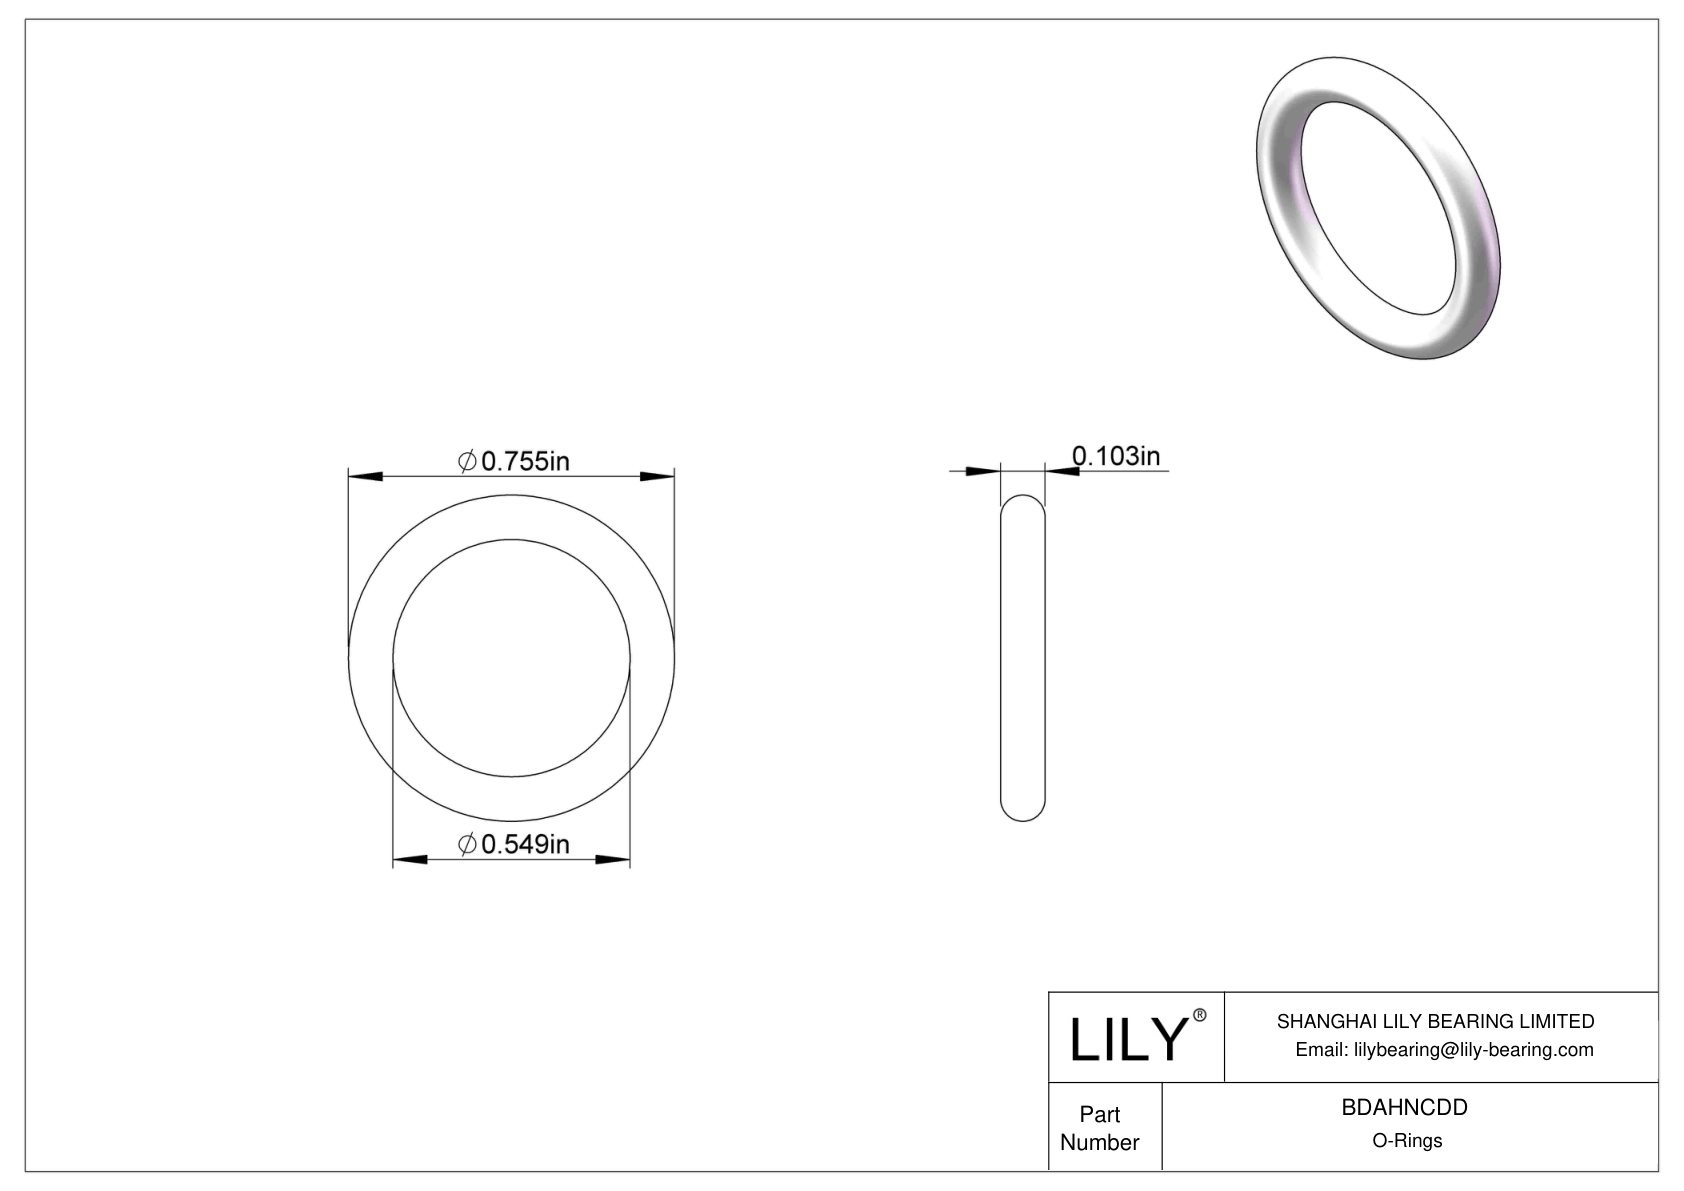 BDAHNCDD Oil Resistant O-Rings Round cad drawing